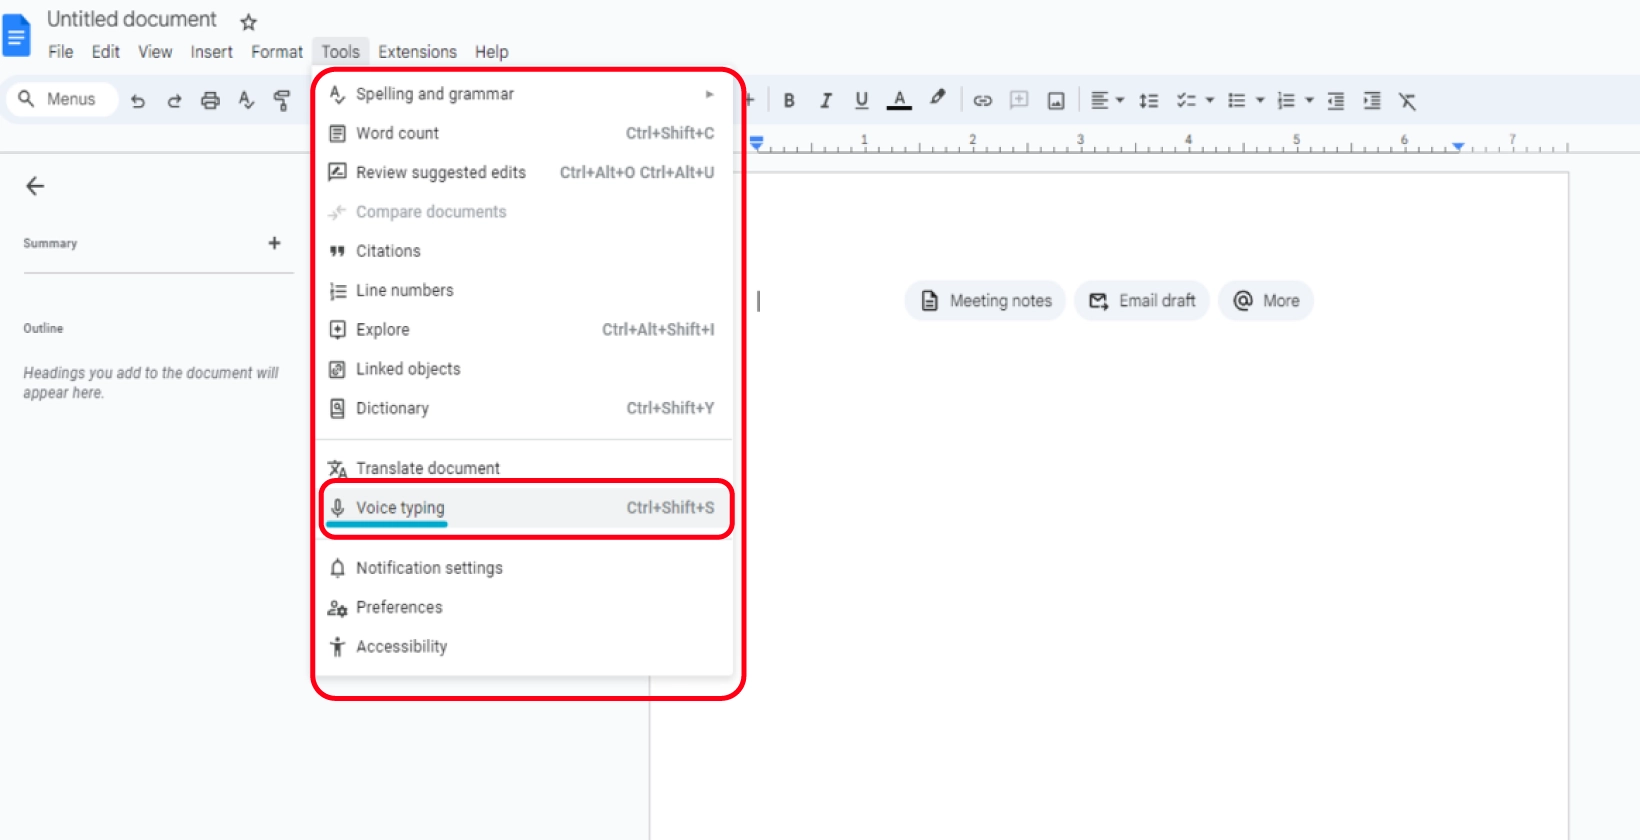 Screenshot showing the voice typing option under the 'Tools' menu on Google Docs.